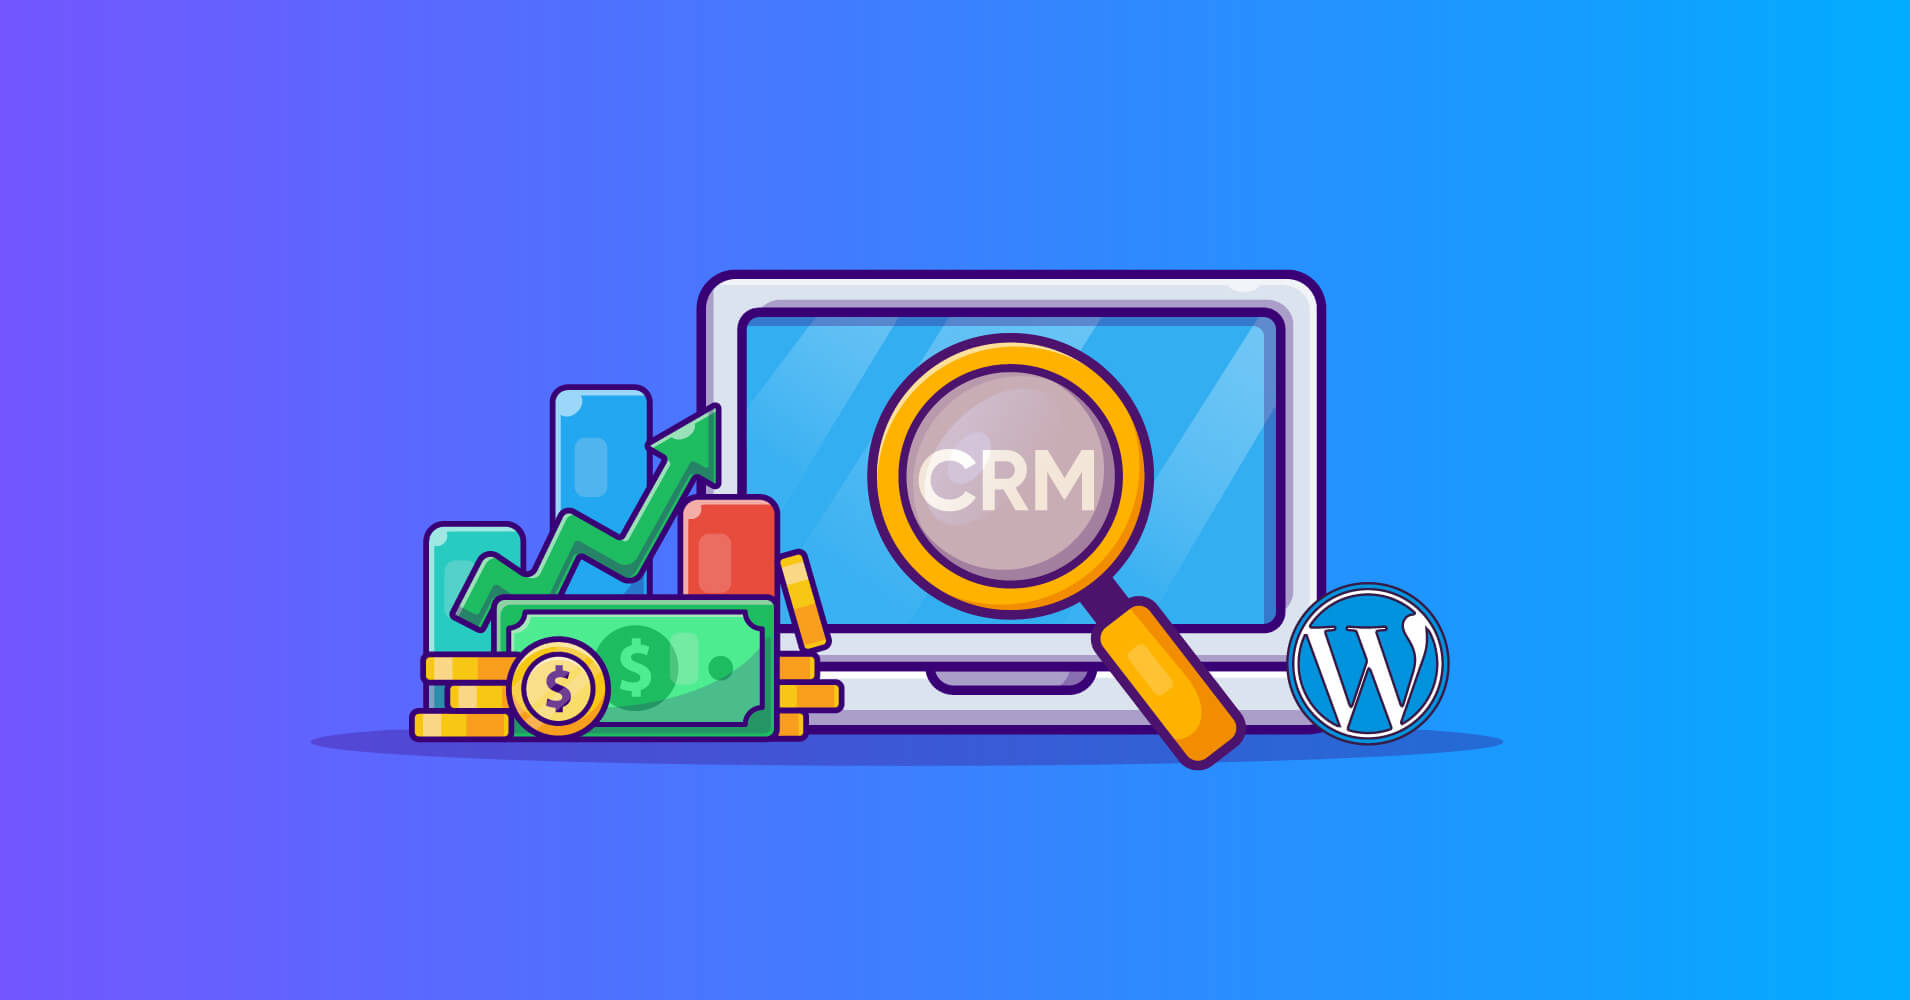 7 Best WordPress CRM Plugins to Supercharge Your Business